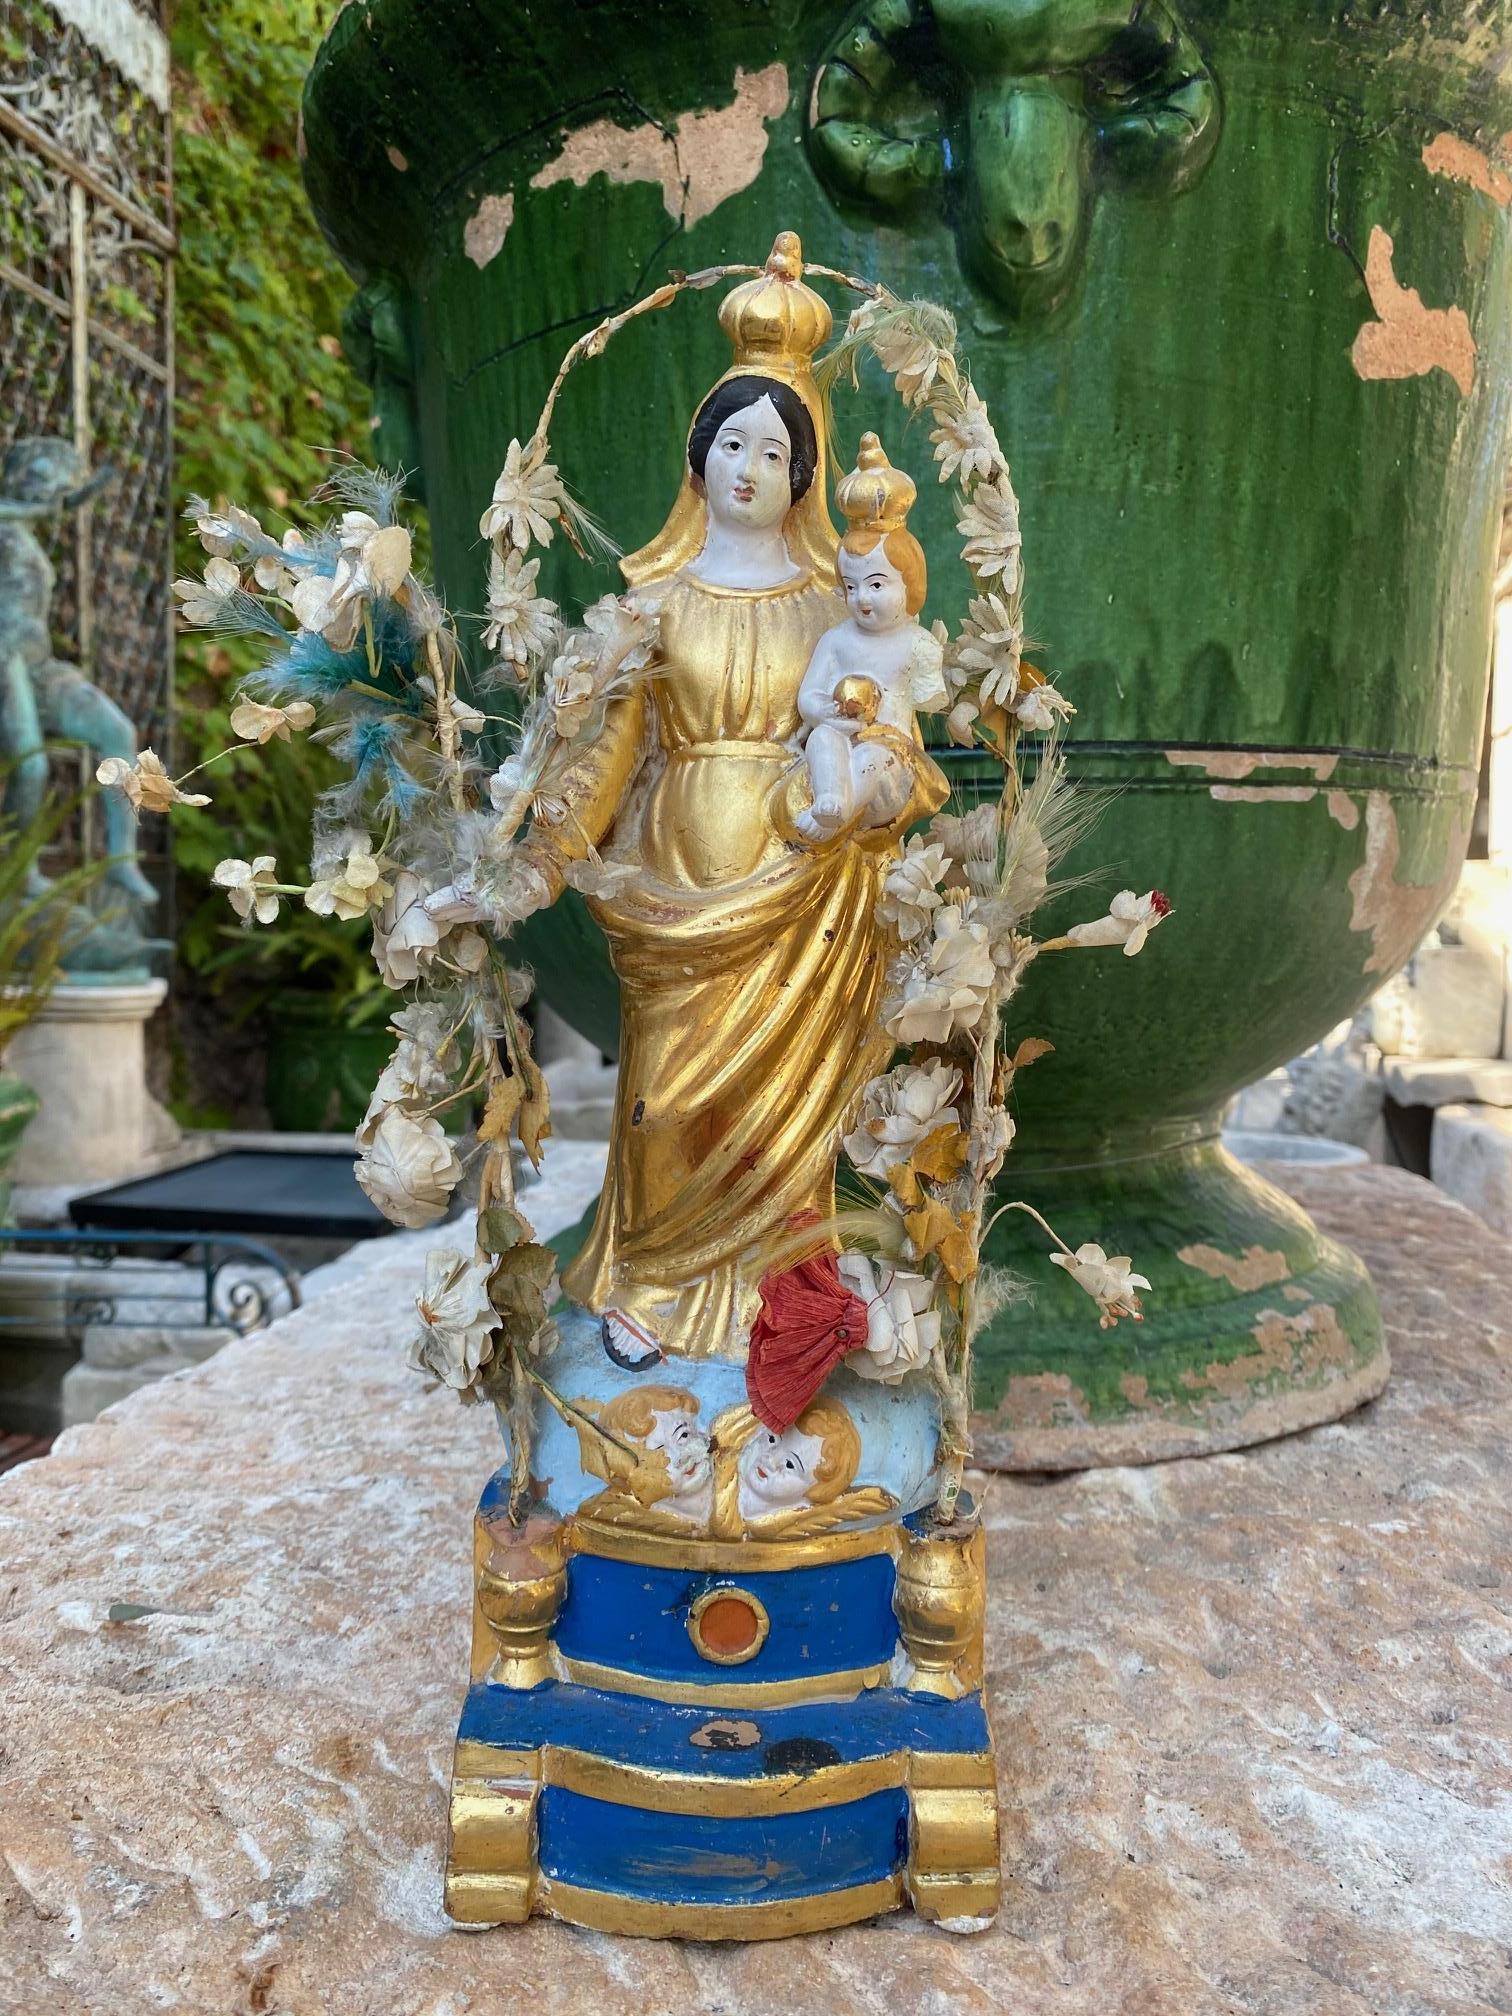 19th C. Santos Hand made statue Virgin Mary and child Antiques Los Angeles CA LA  . Mid 19th Century Rare Hand made terracotta Clay “ Santos “ saint Virgin Mary with Child . 

Typical of Luberon in central Provence in Southern France. Lubéron a